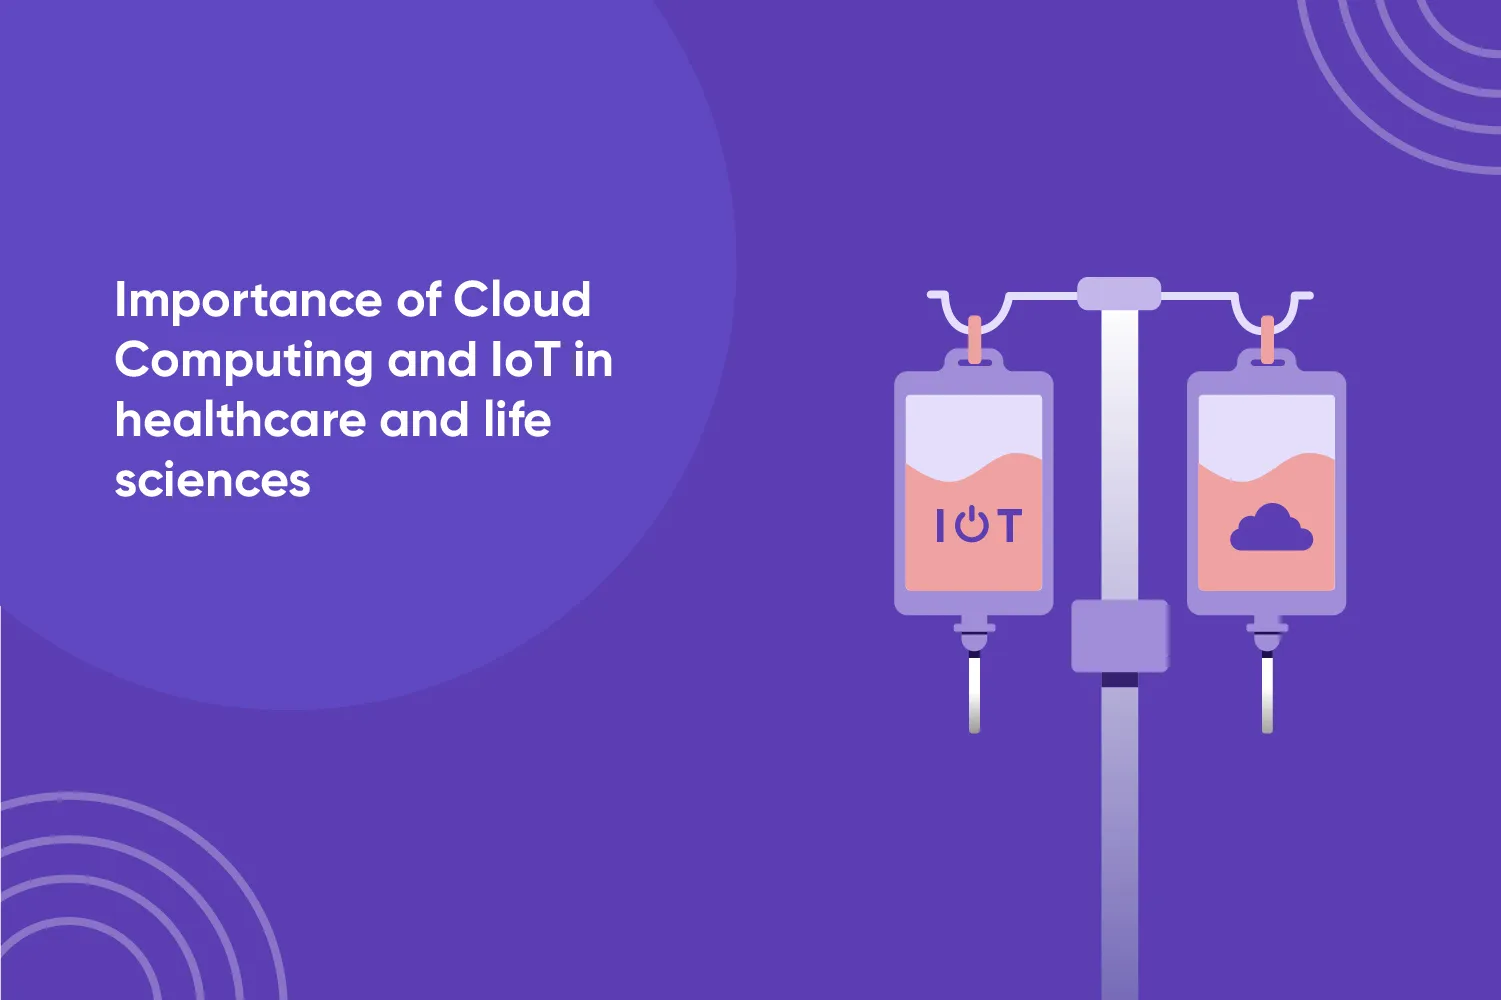 Importance of Cloud Computing and IoT in healthcare and Life Sciences